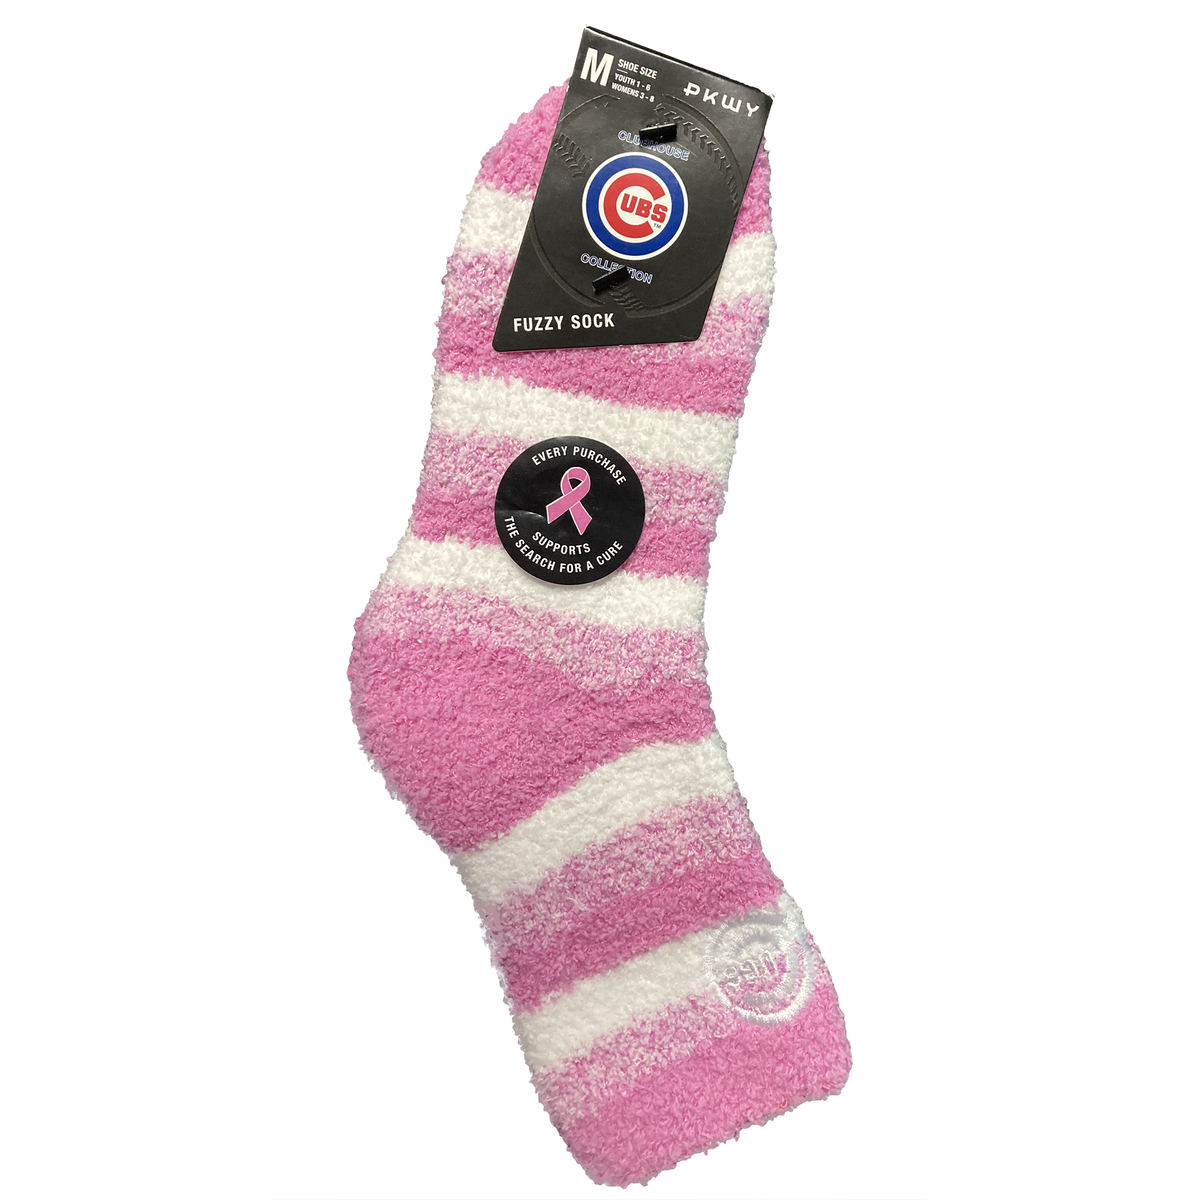 Chicago Cubs Fuzzy Socks - Breast Cancer